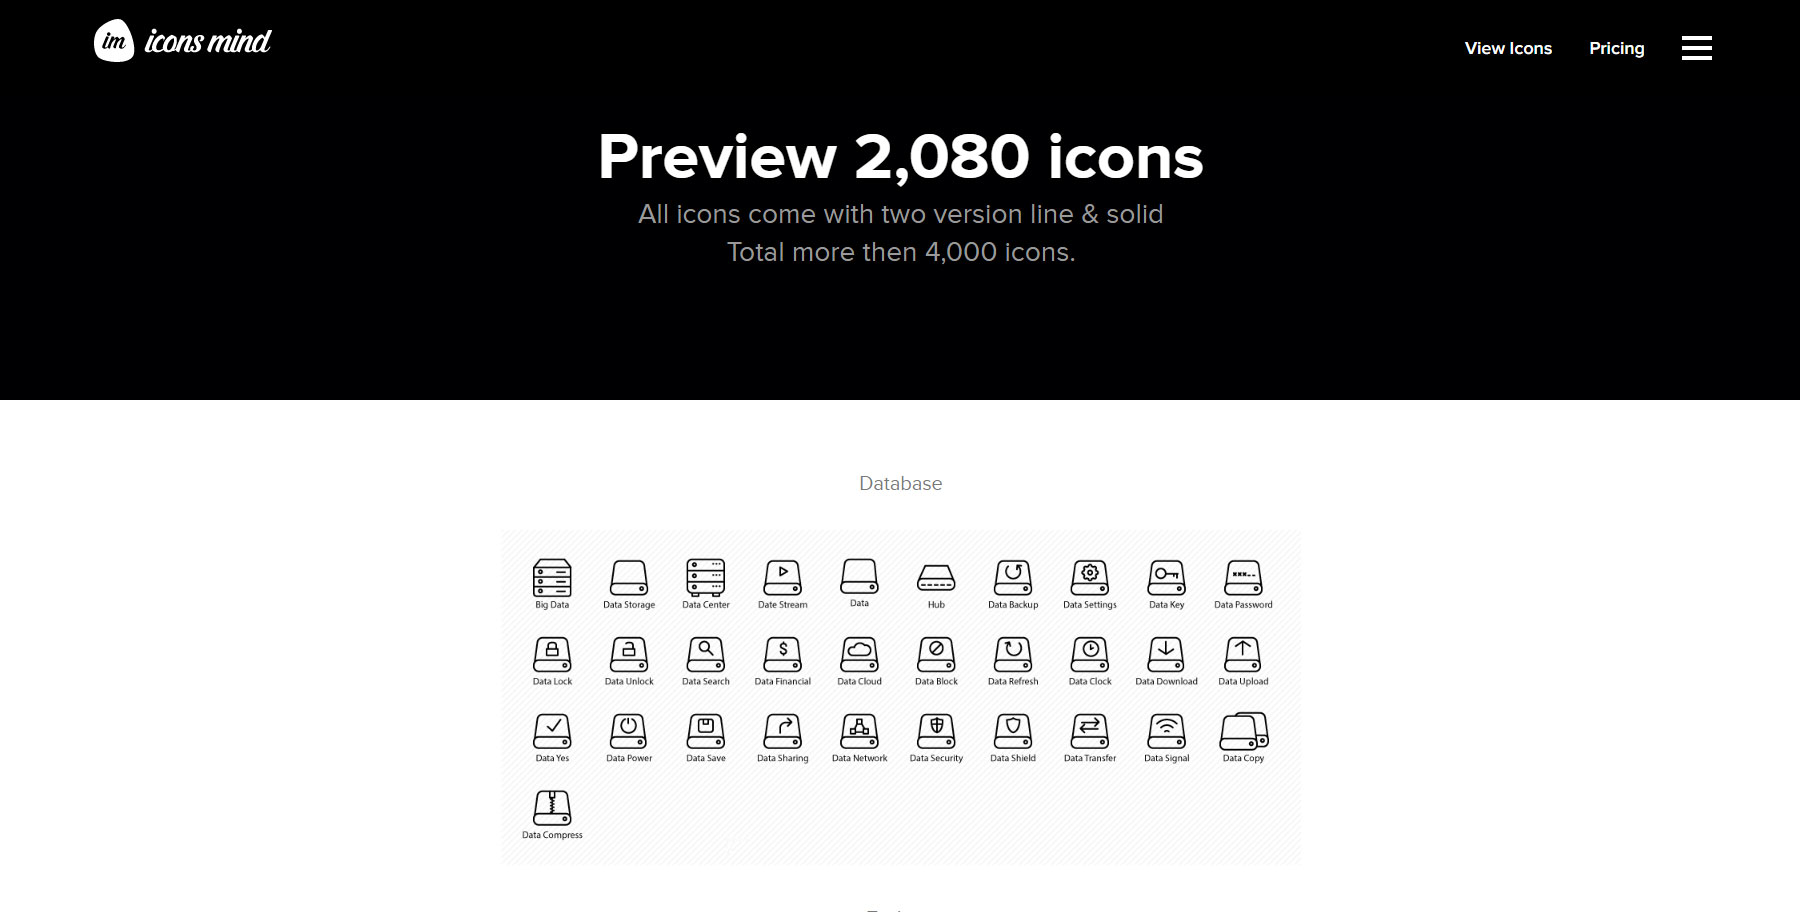 Perfect icons start with icons mind - Website of the Day